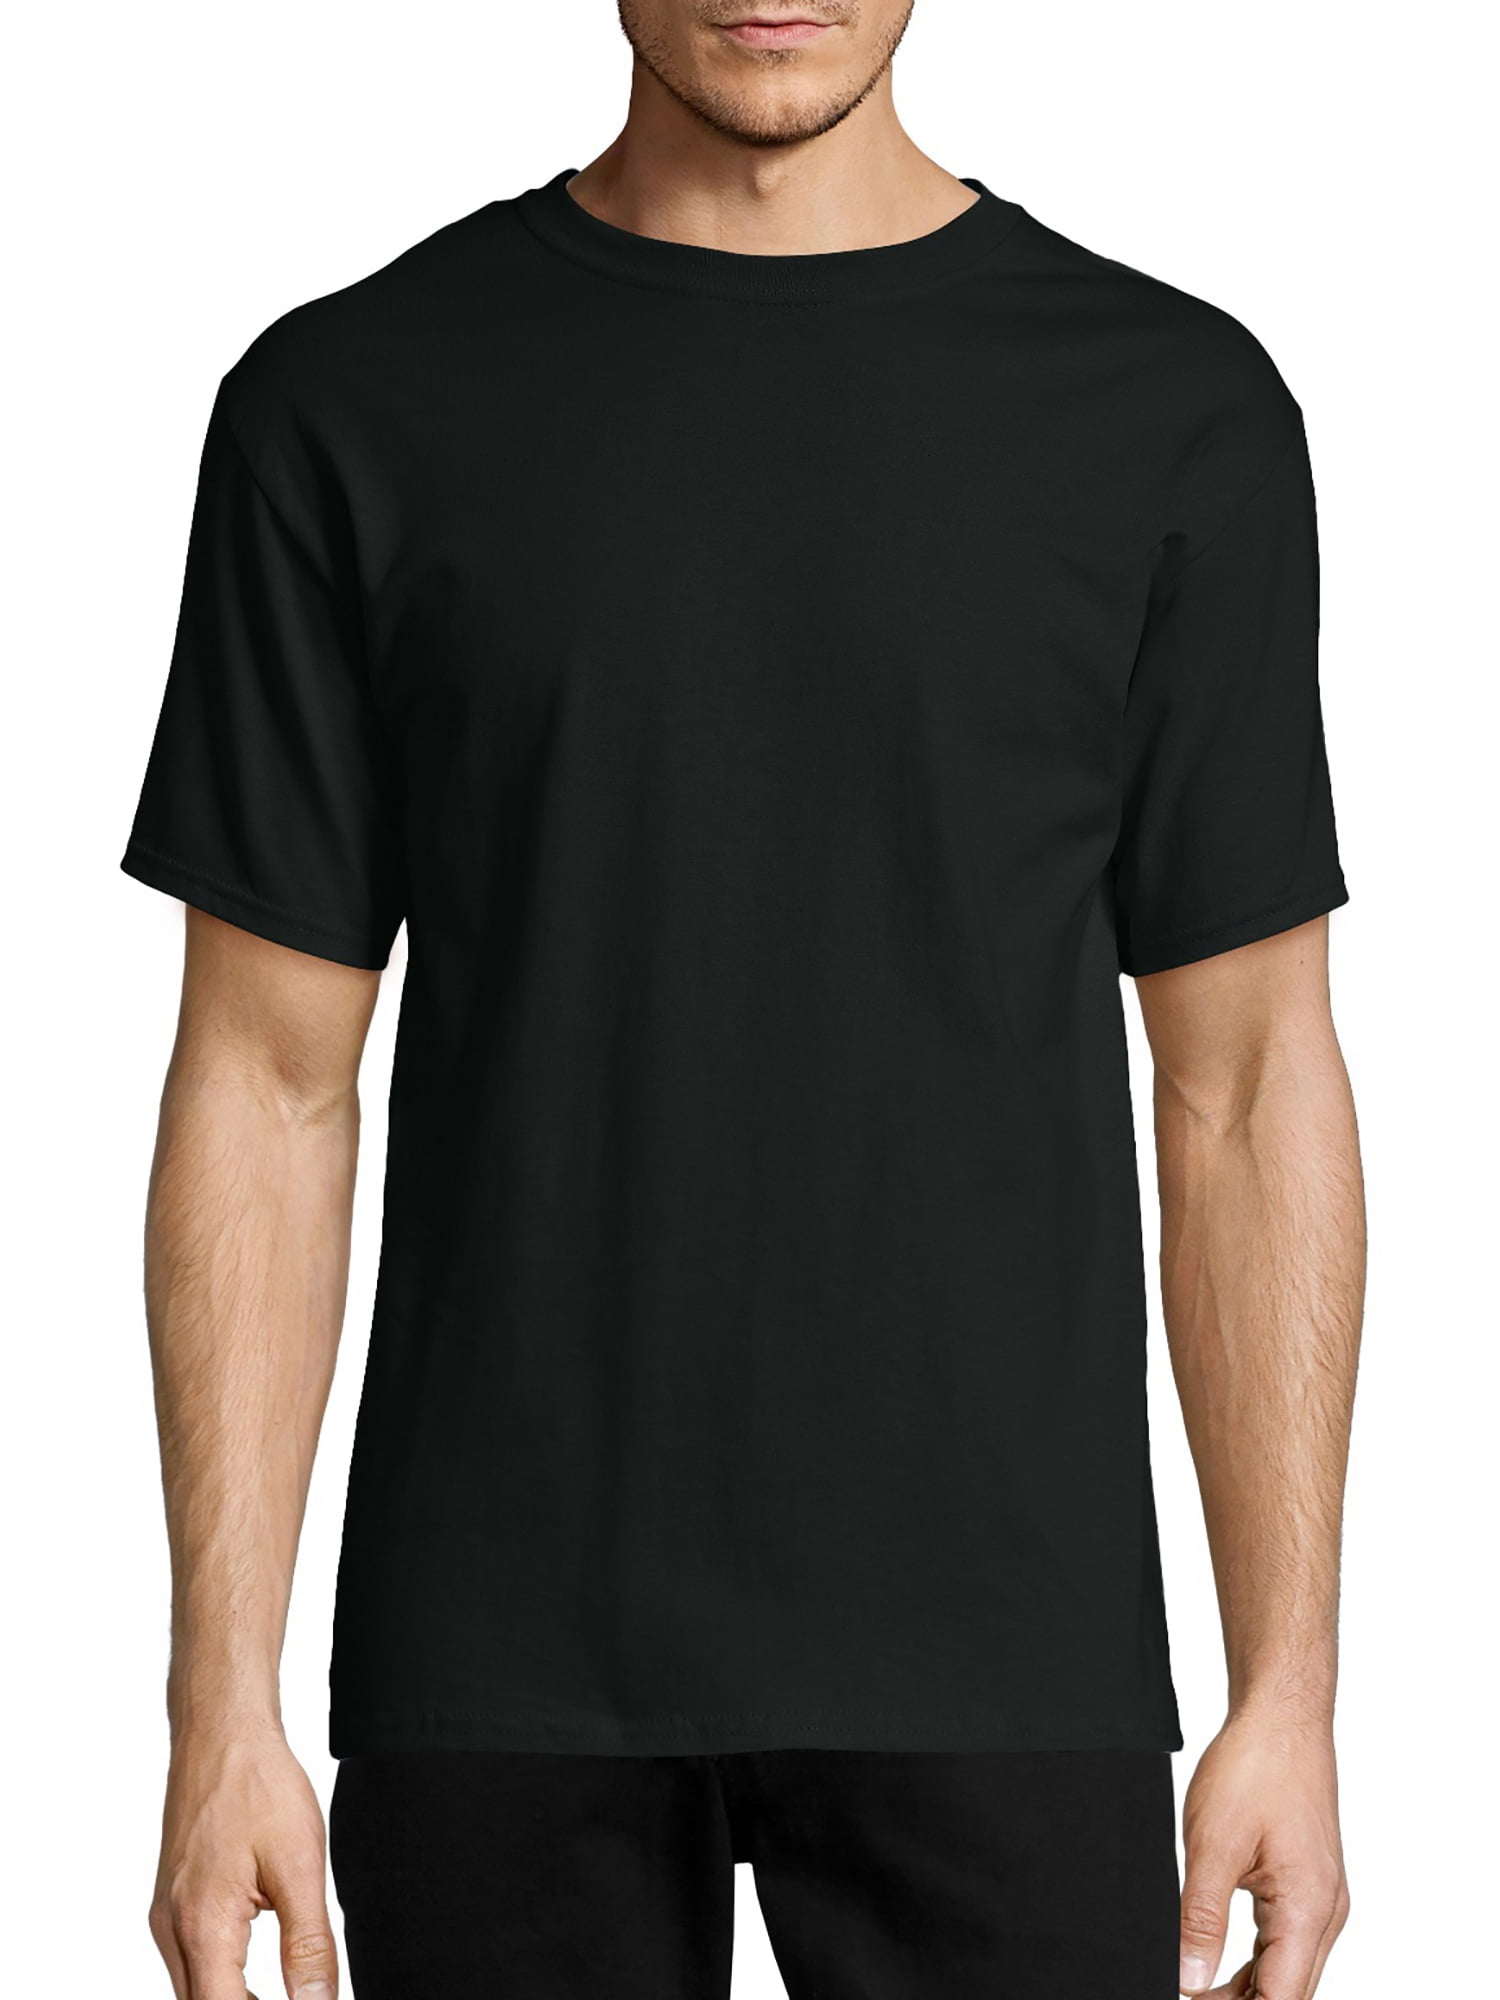 Hanes Authentic Men's T-Shirt (Big & Tall Sizes Available) Black 5XL - image 1 of 5